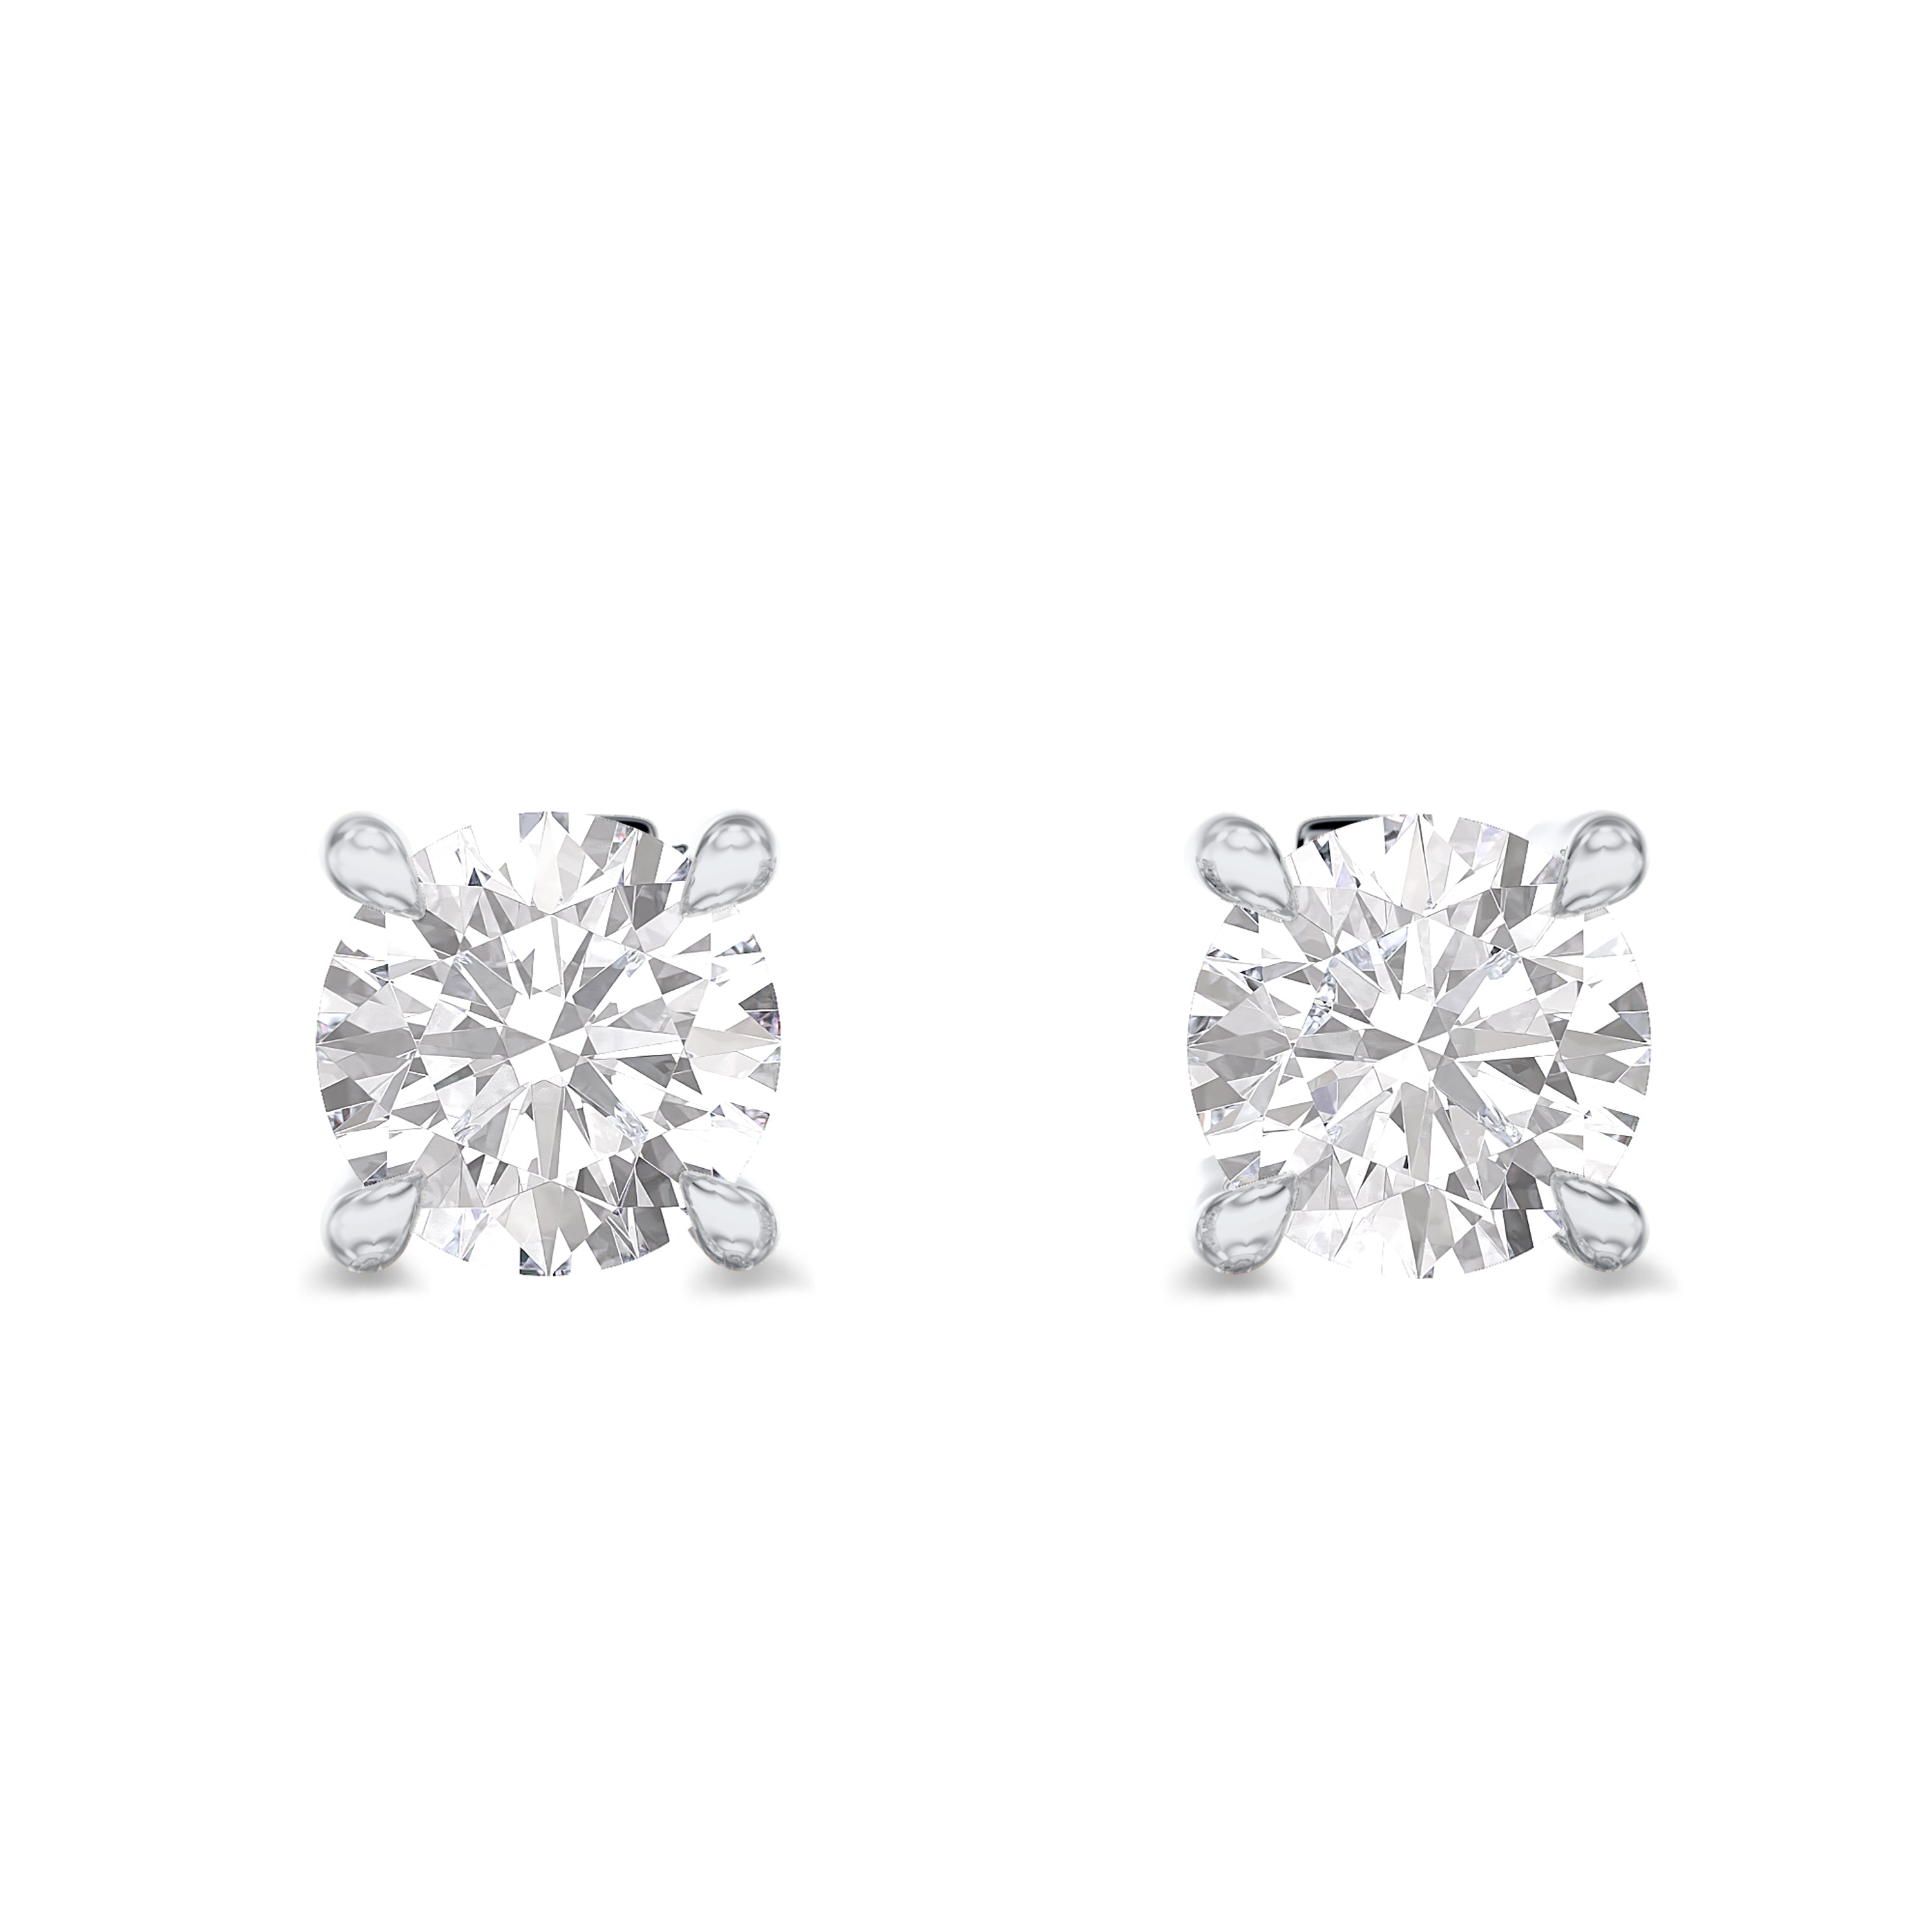 0.77 carat lab grown solitaire diamond earrings in 18k gold, E-F color, VS-SI clarity